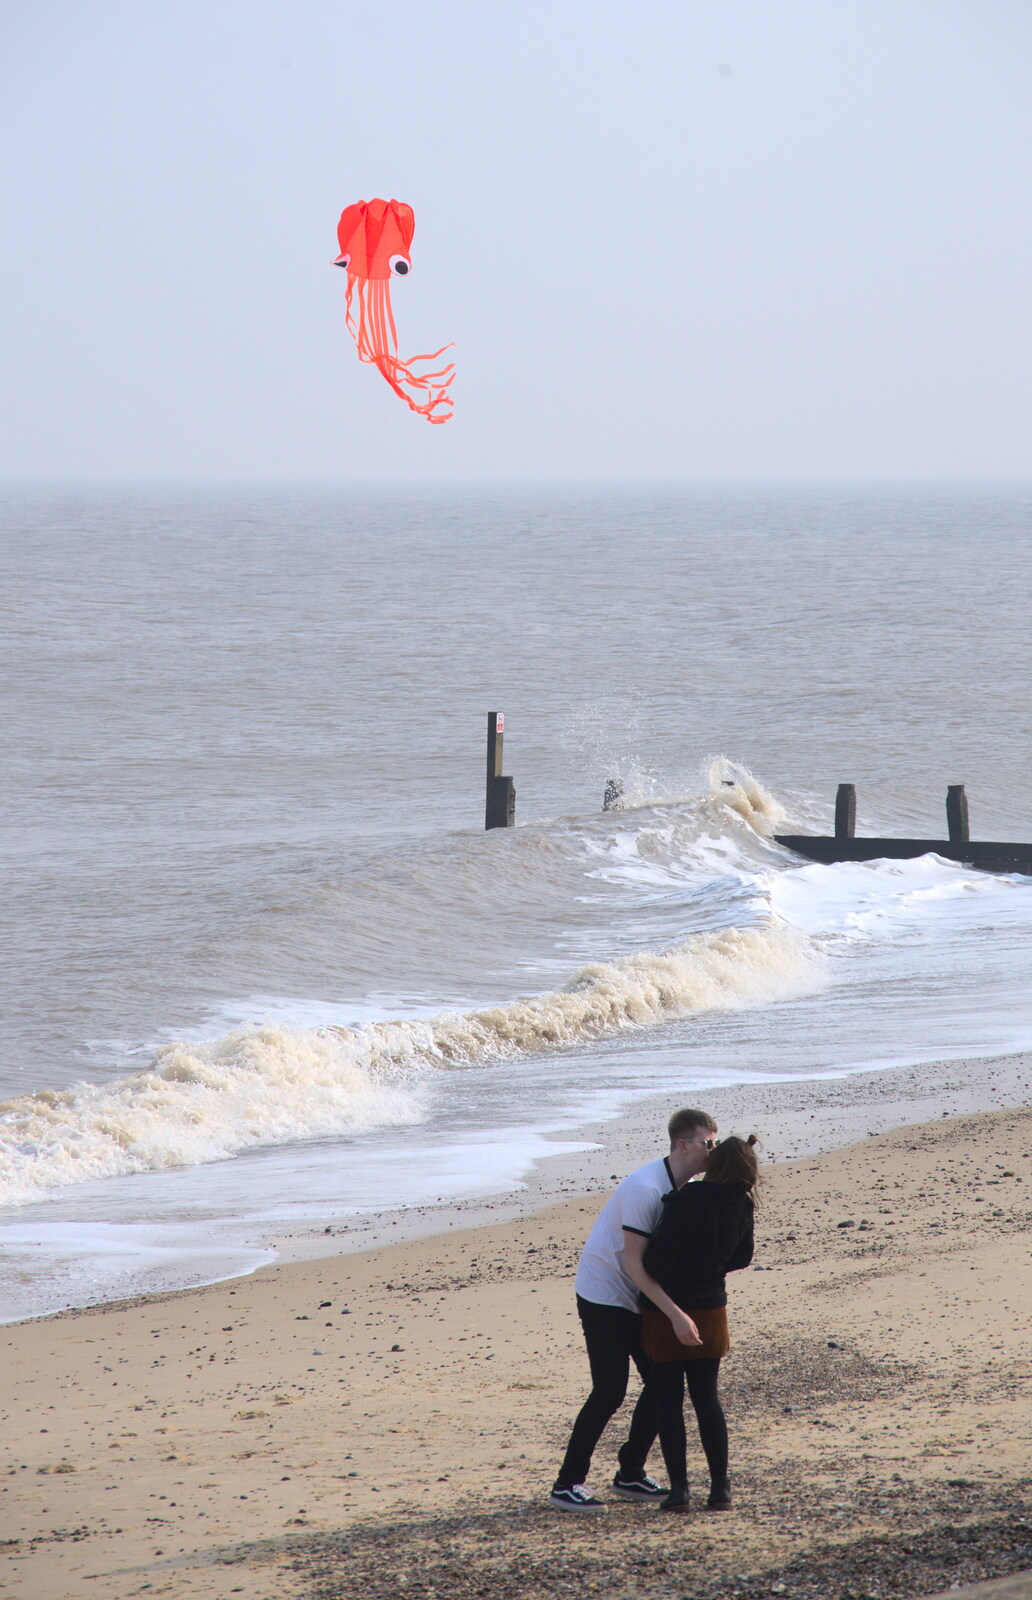 A snog on the beach, as a kite flies around from On The Beach, Southwold, Suffolk - 7th April 2019